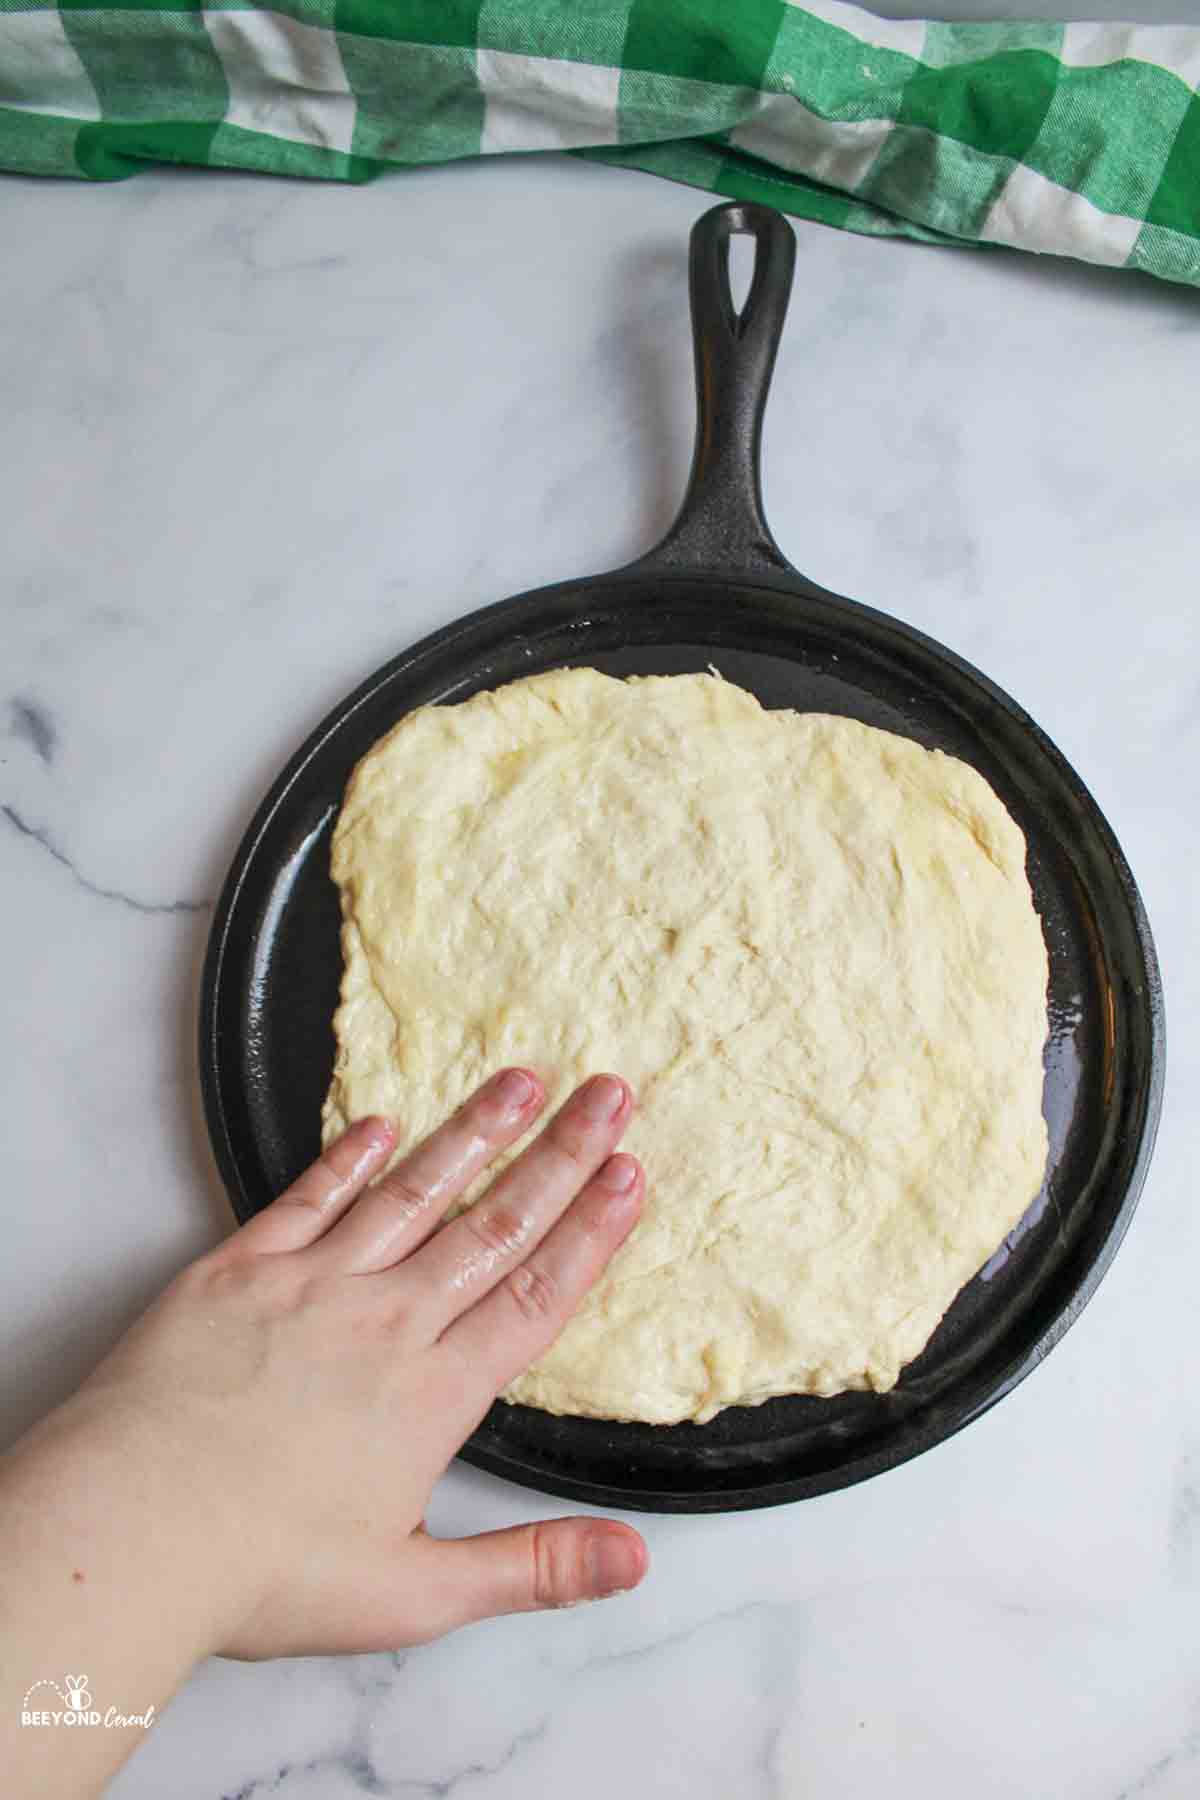 hand pressing dough out into a round circle on a greased iron skillet.